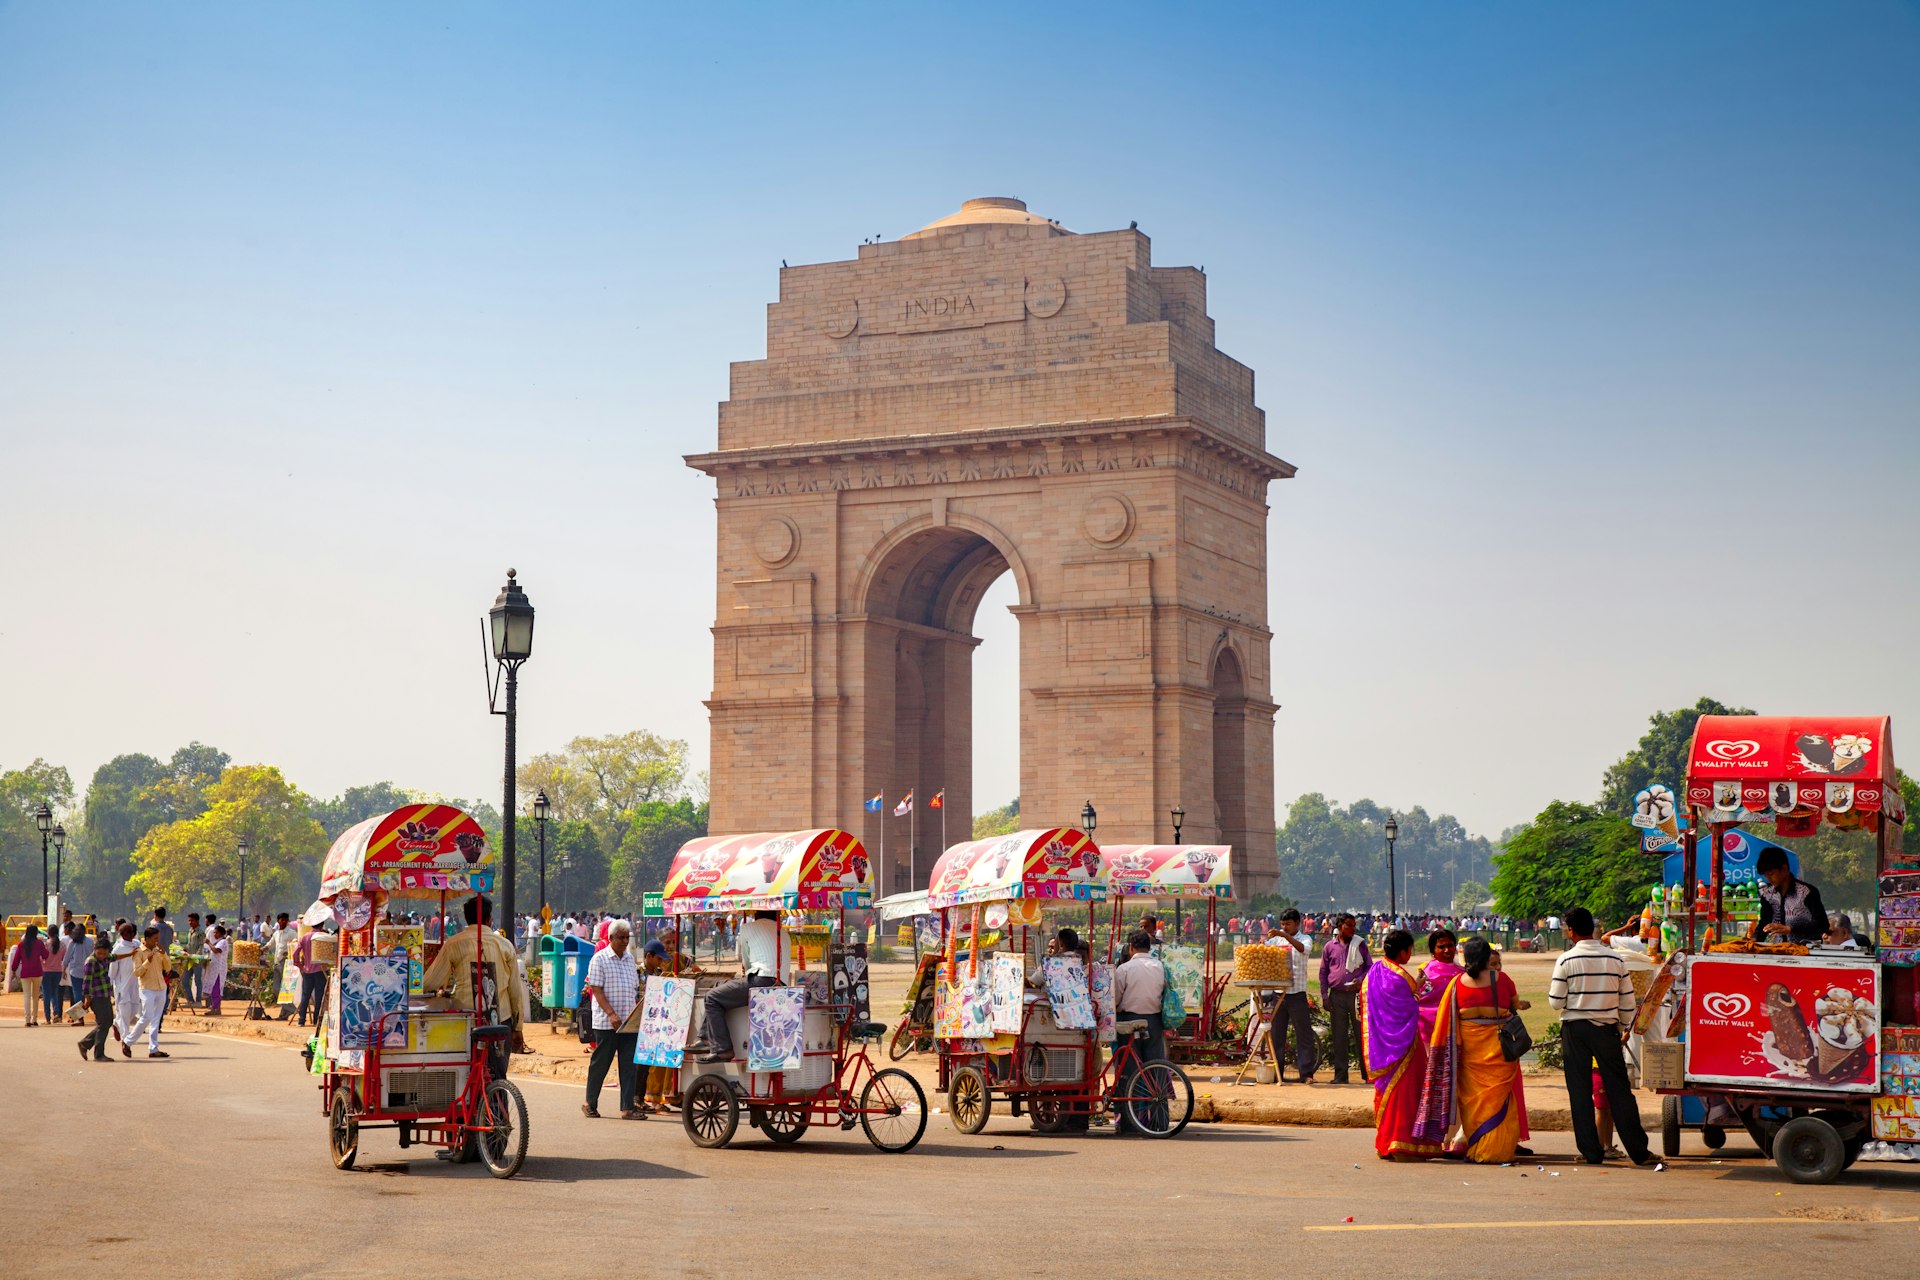 Many bicycle ice cream sellers in front of the India Gate